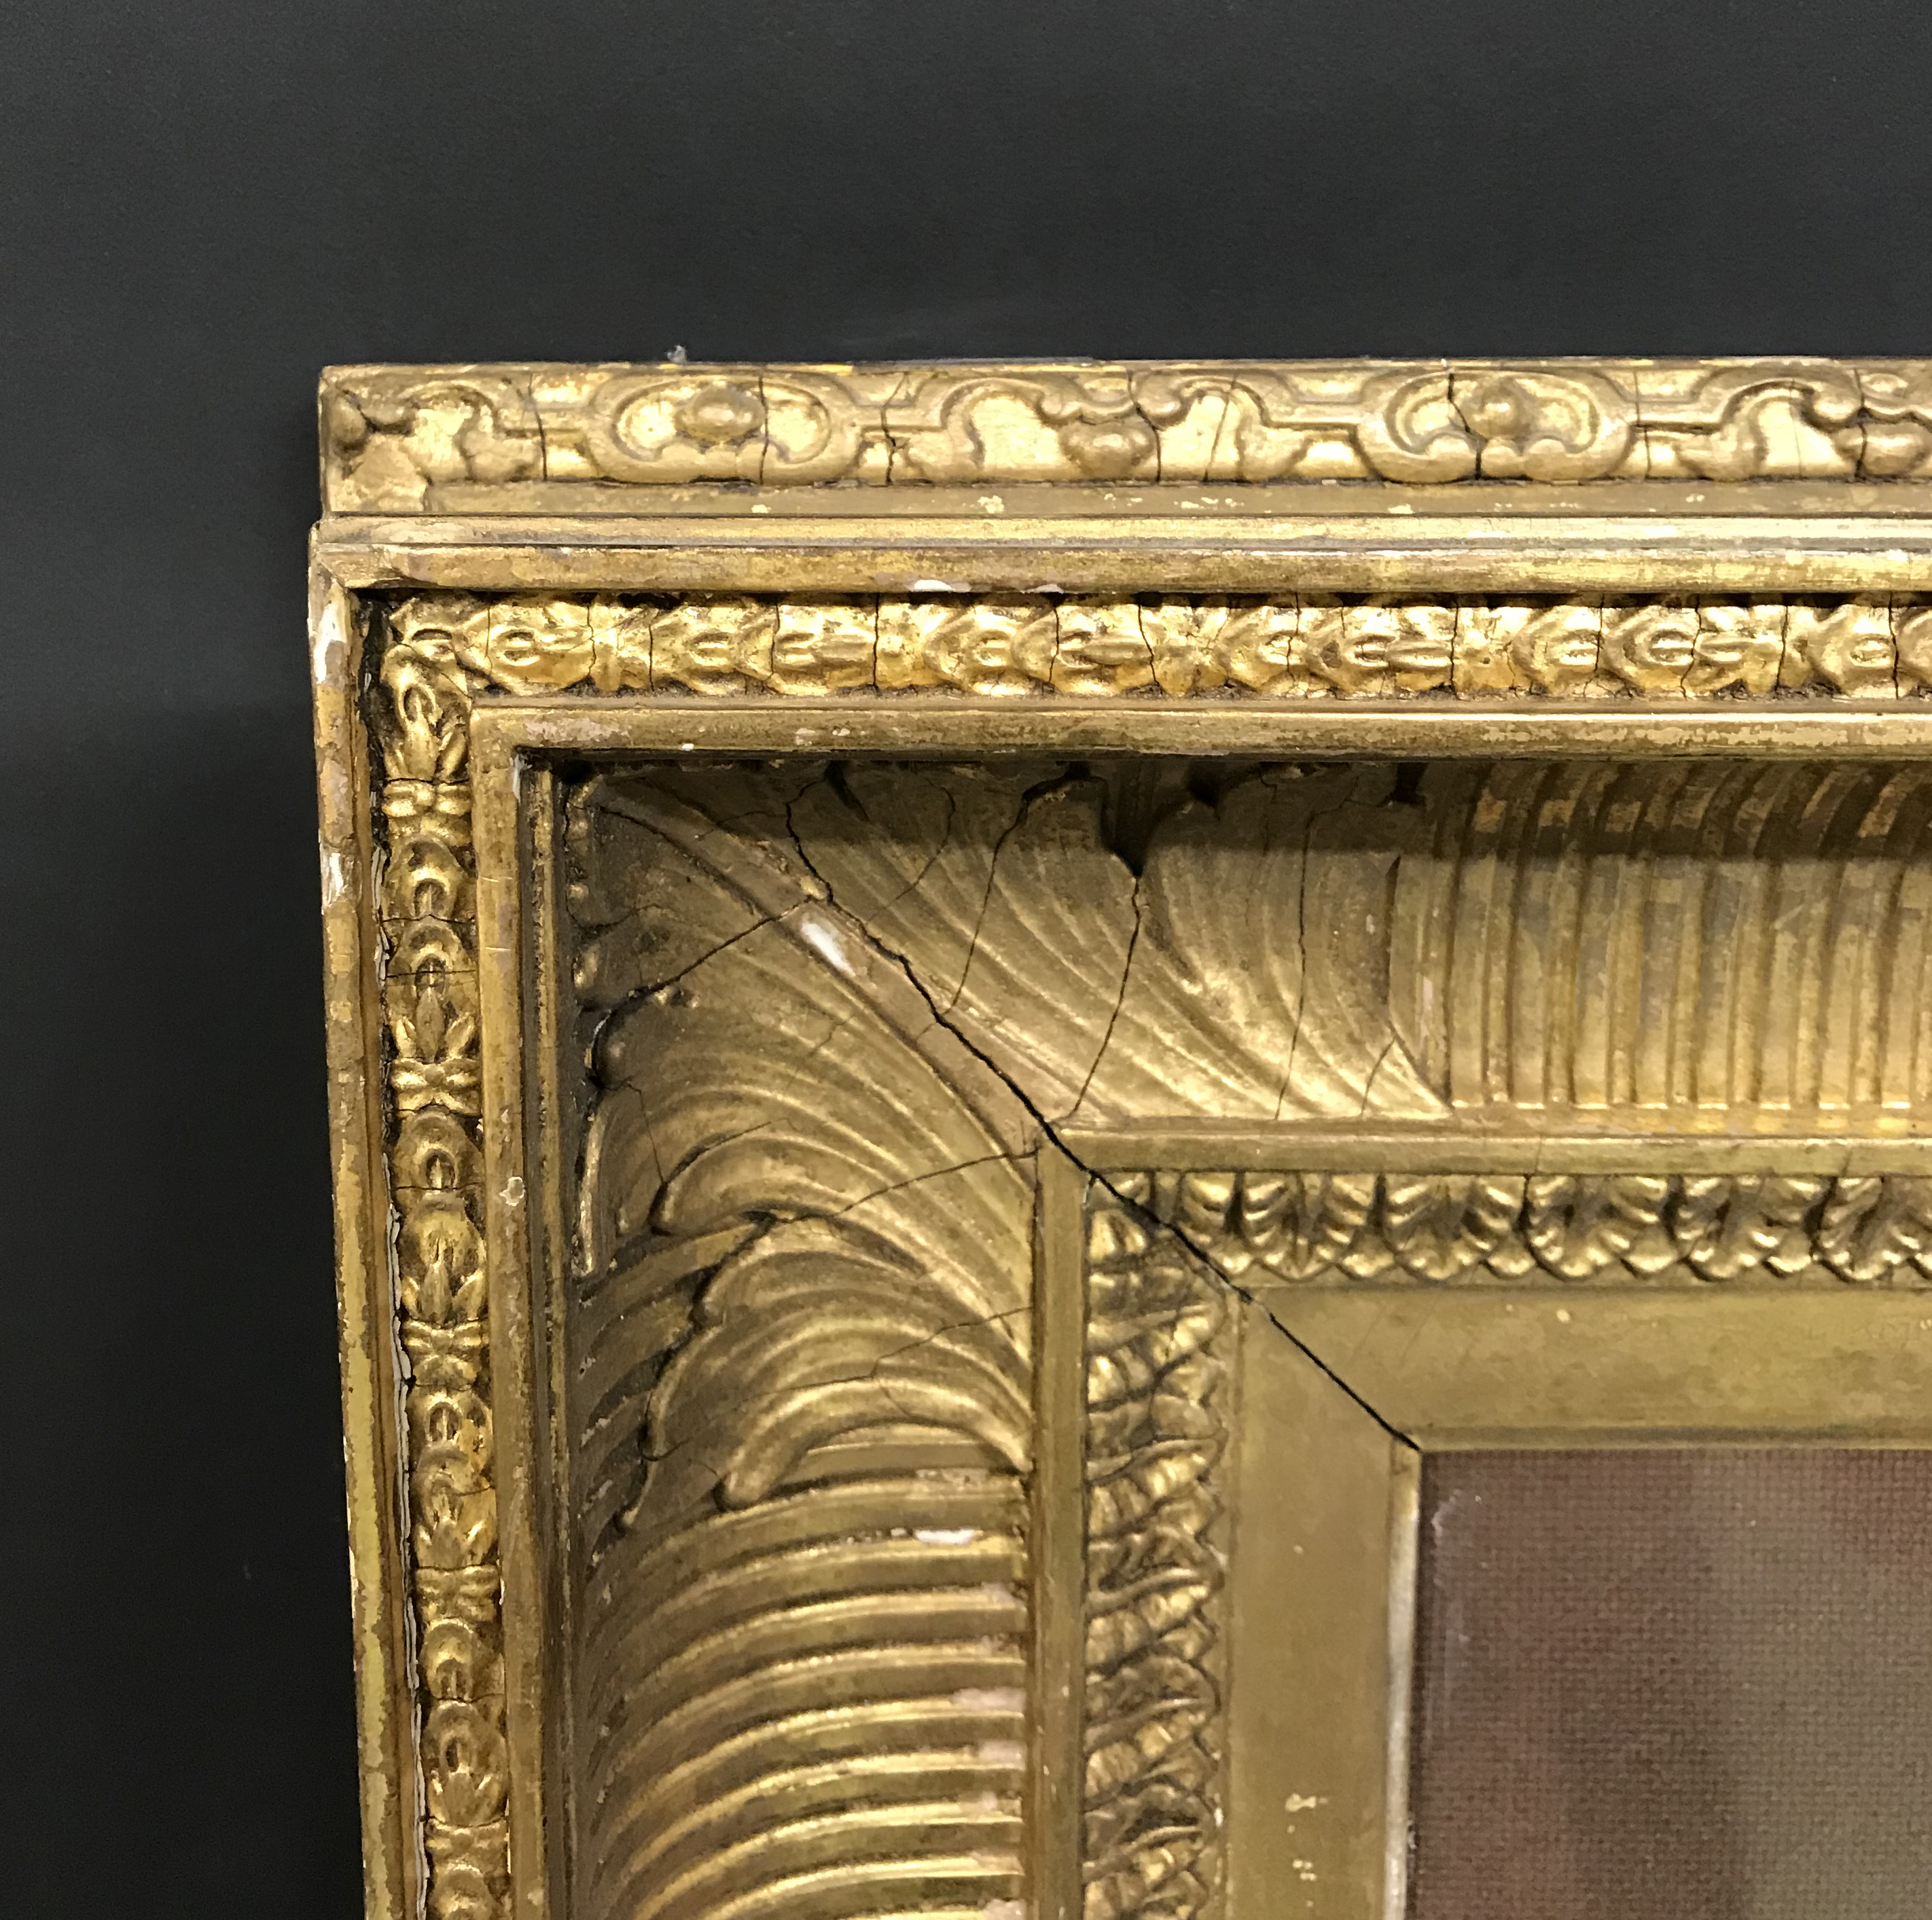 19th Century English School. A Gilt Composition Frame, with inset glass, 17.5" x 14" (rebate).